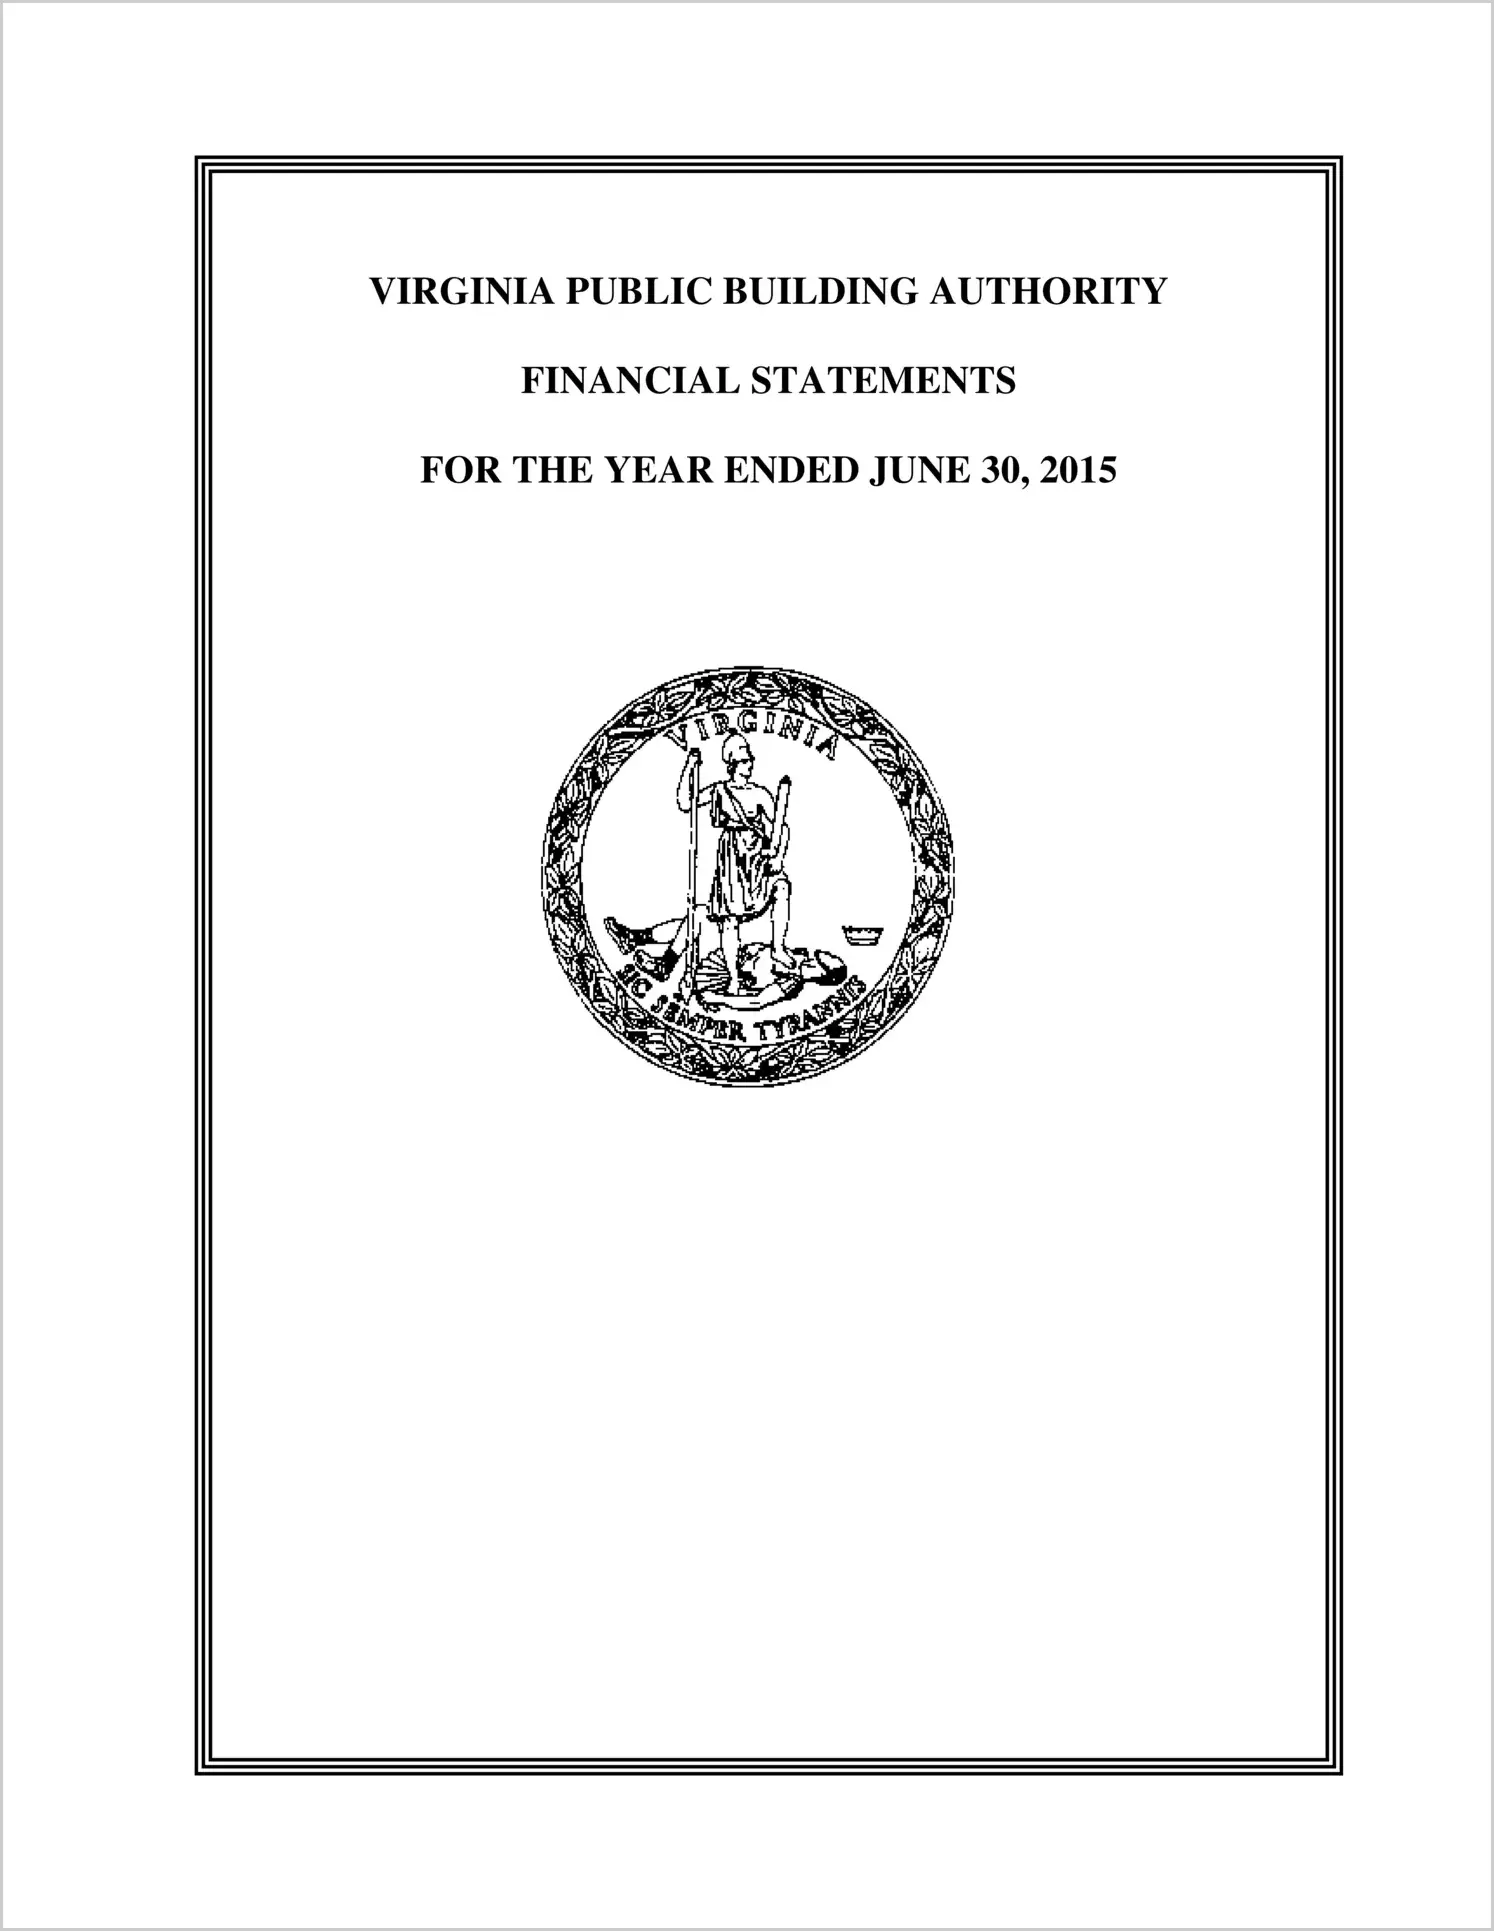 Virginia Public Building Authority Financial Statements for the year ended June 30, 2015